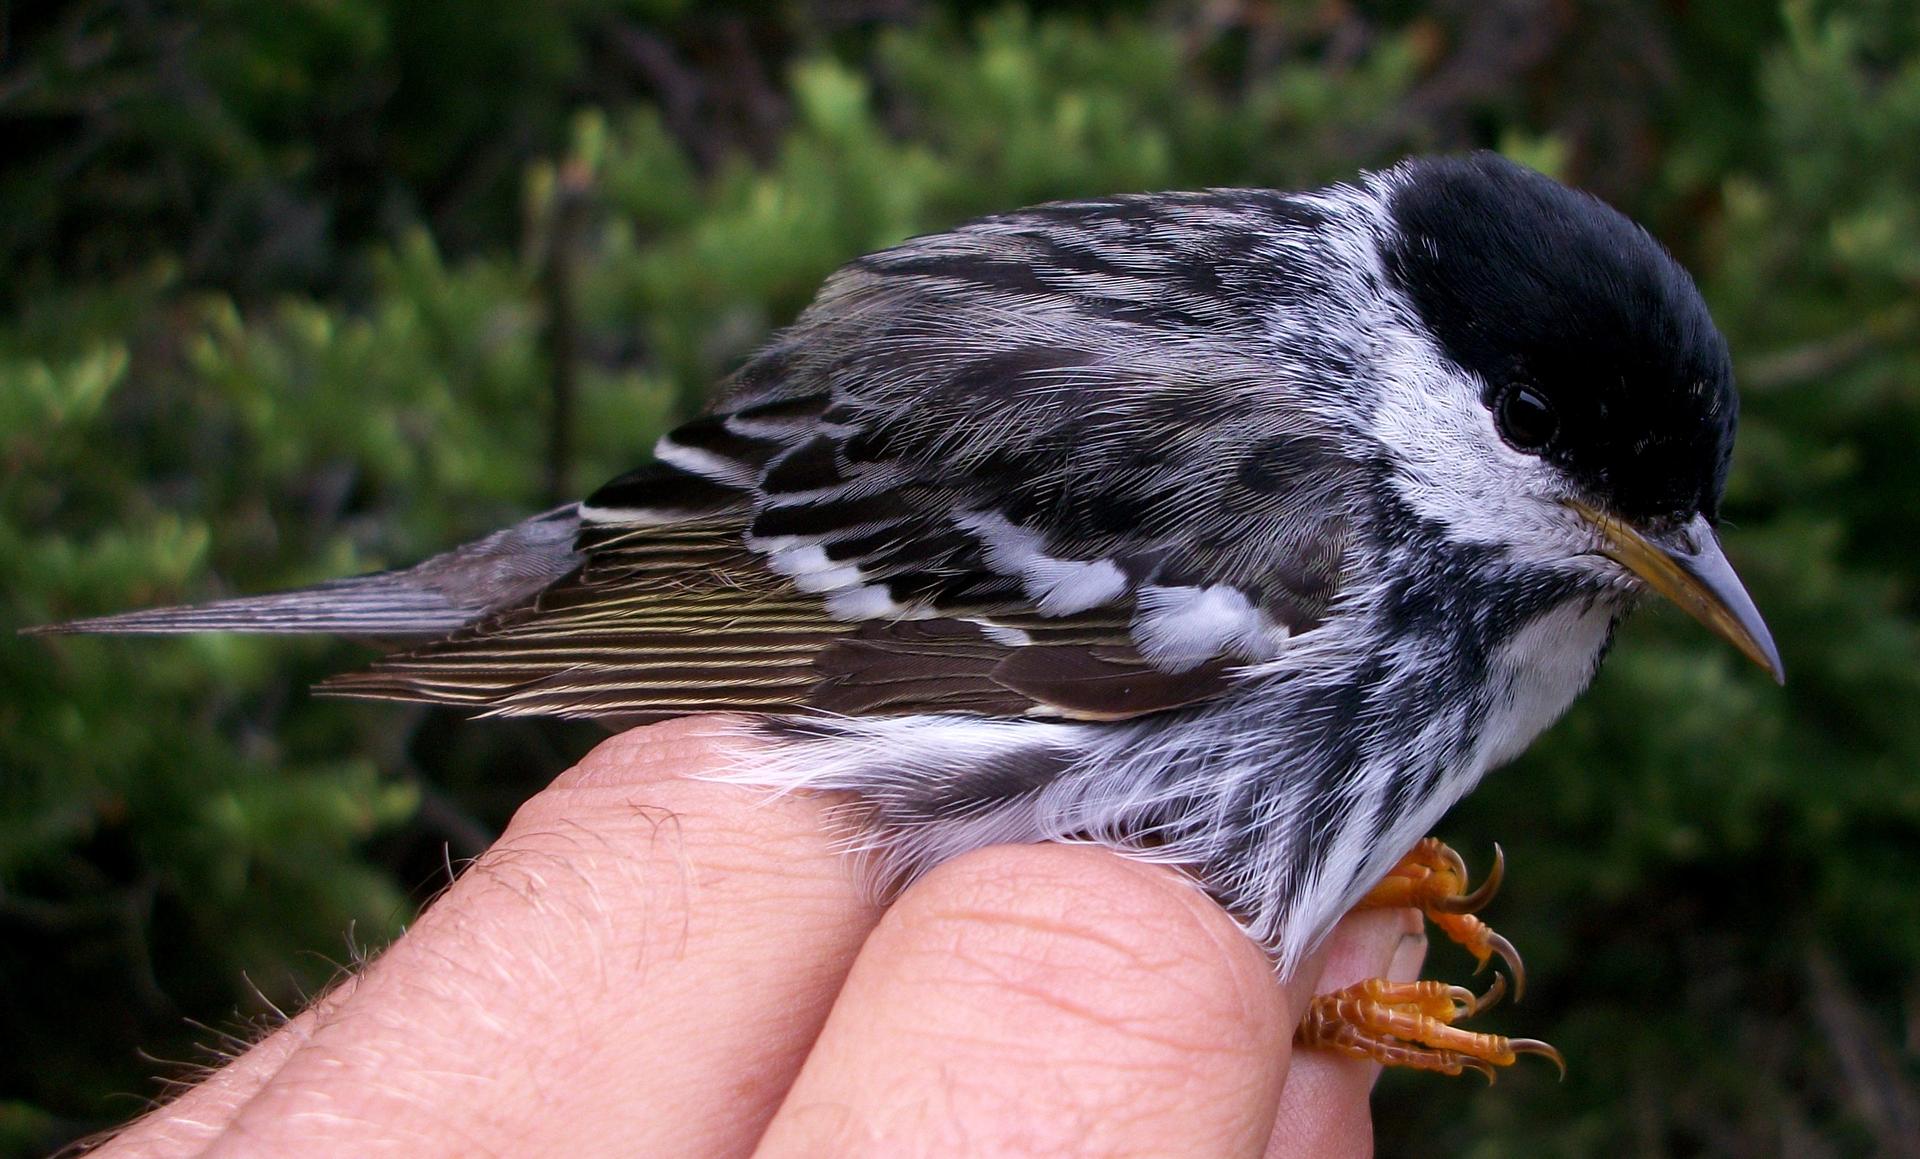 A Blackpoll warbler sits on a person's hand.